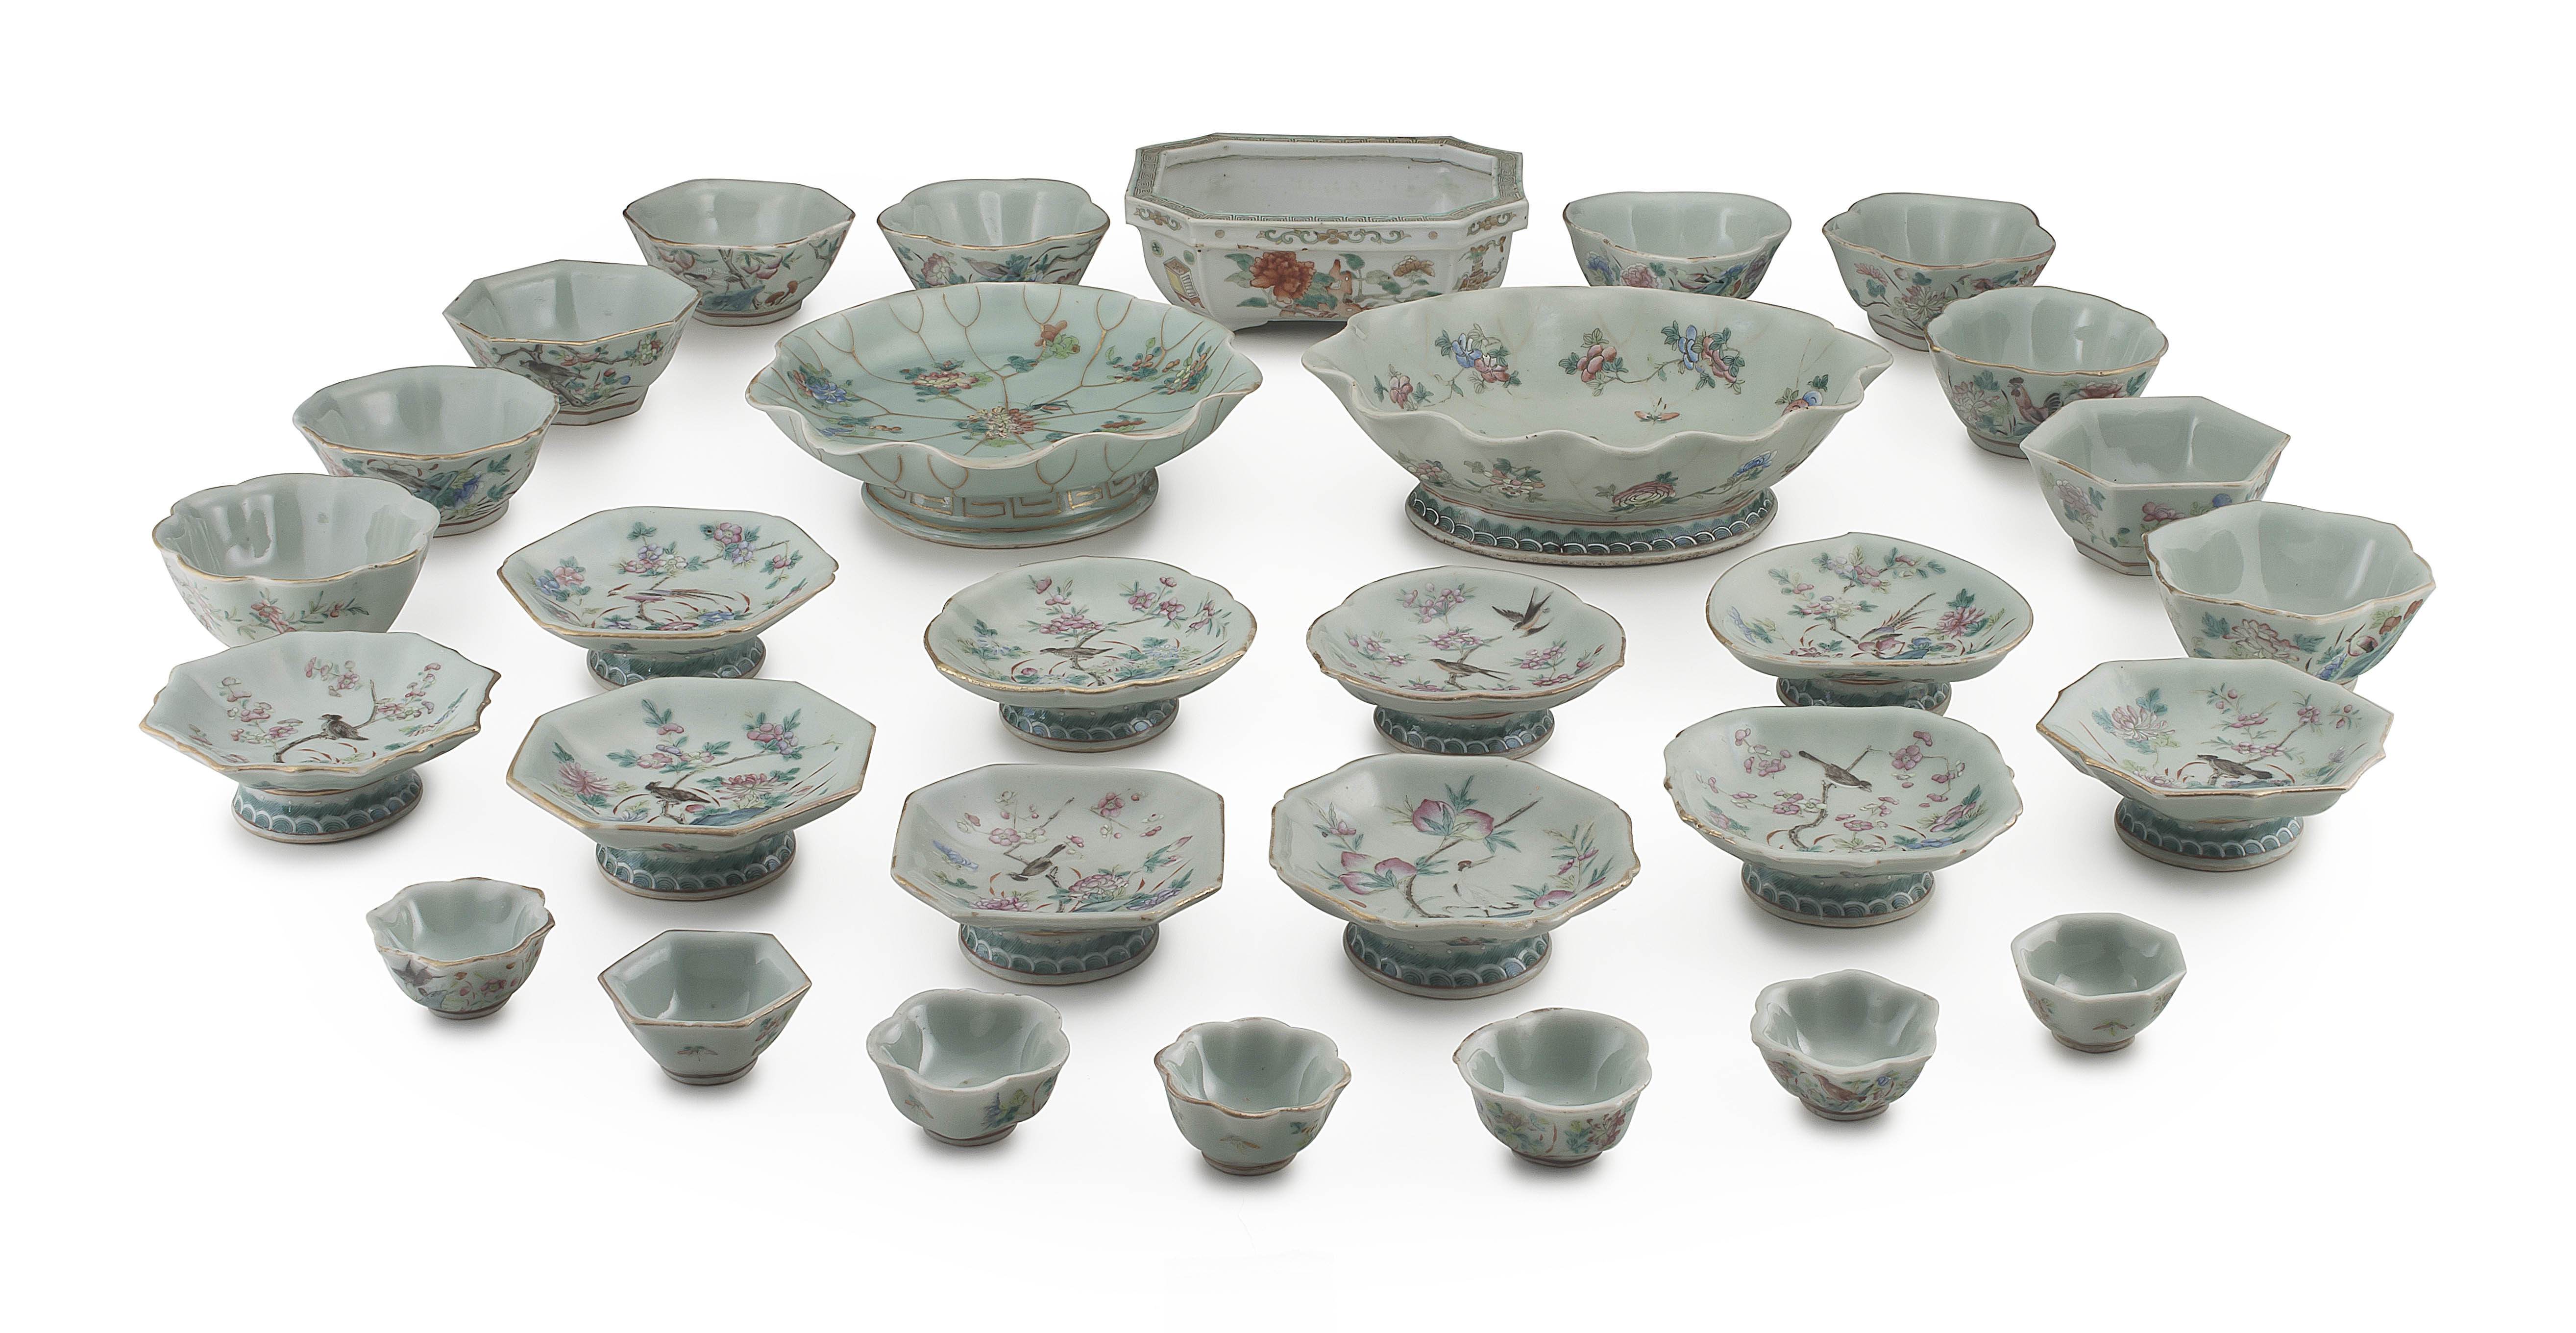 A collection of Chinese celadon-glazed and famille-rose wares, 20th century